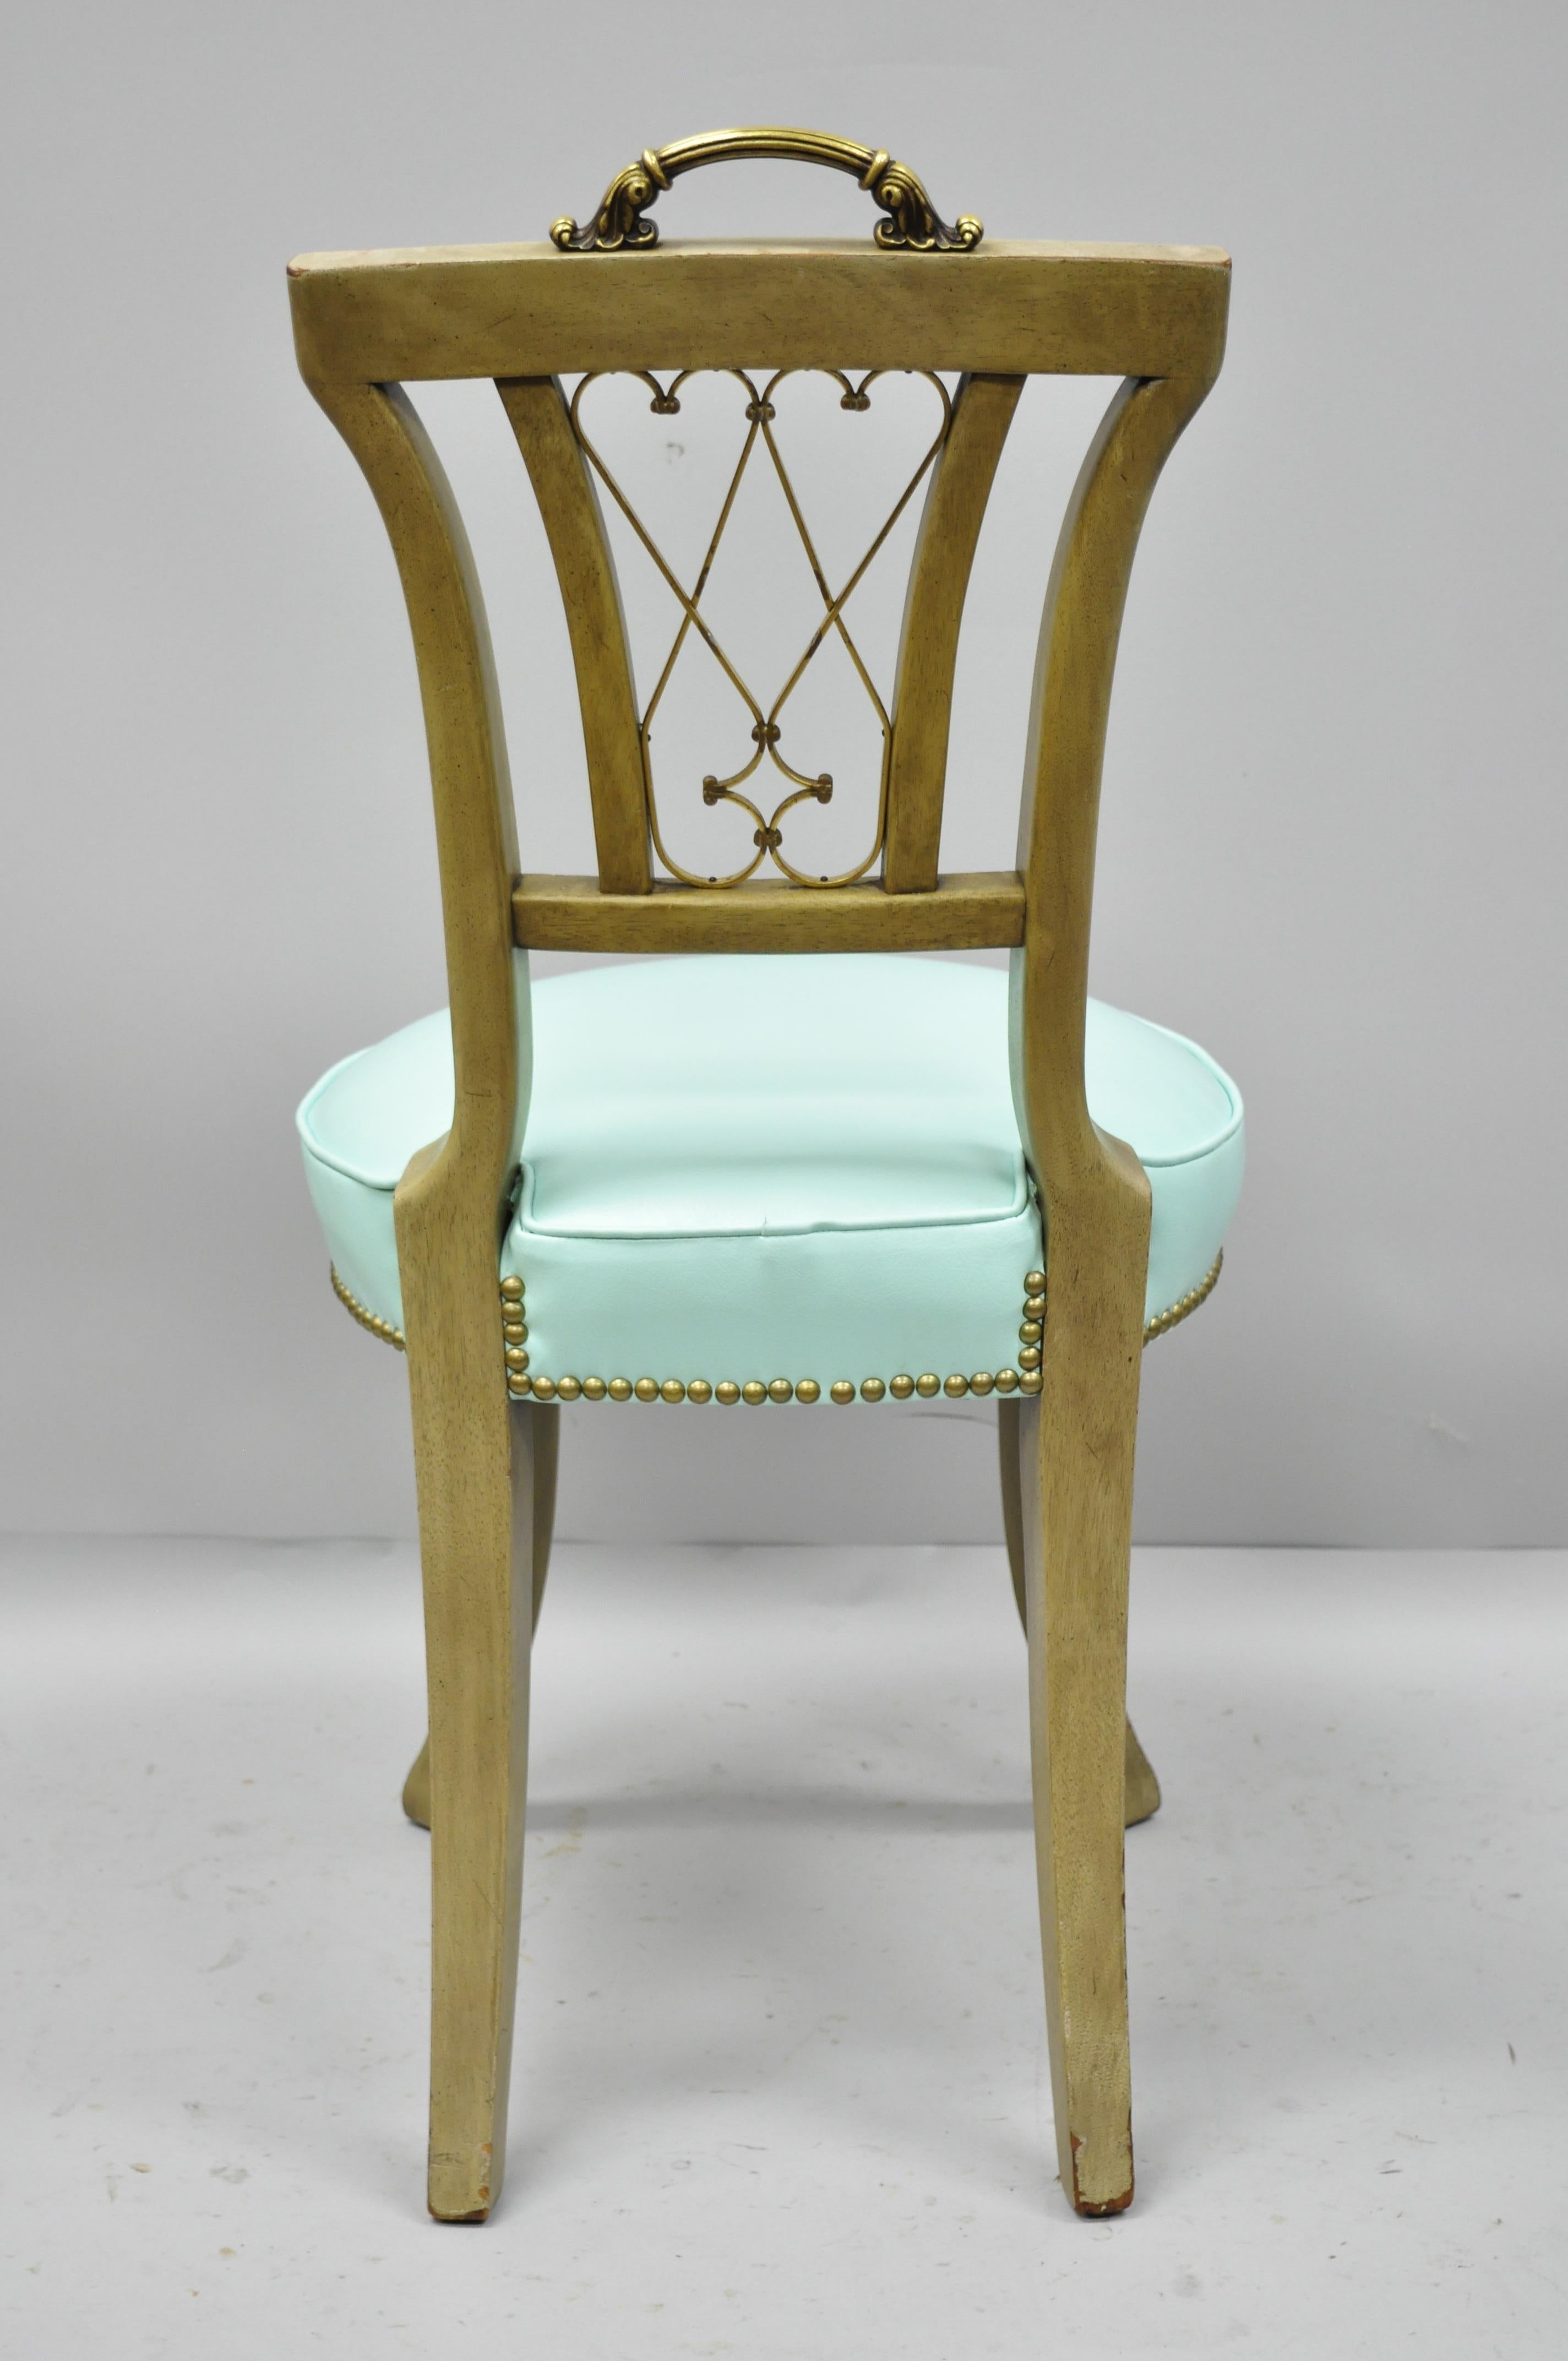 Carved Mahogany French Regency Style Chairs with Brass Handle & Aqua Vinyl, Pair For Sale 3